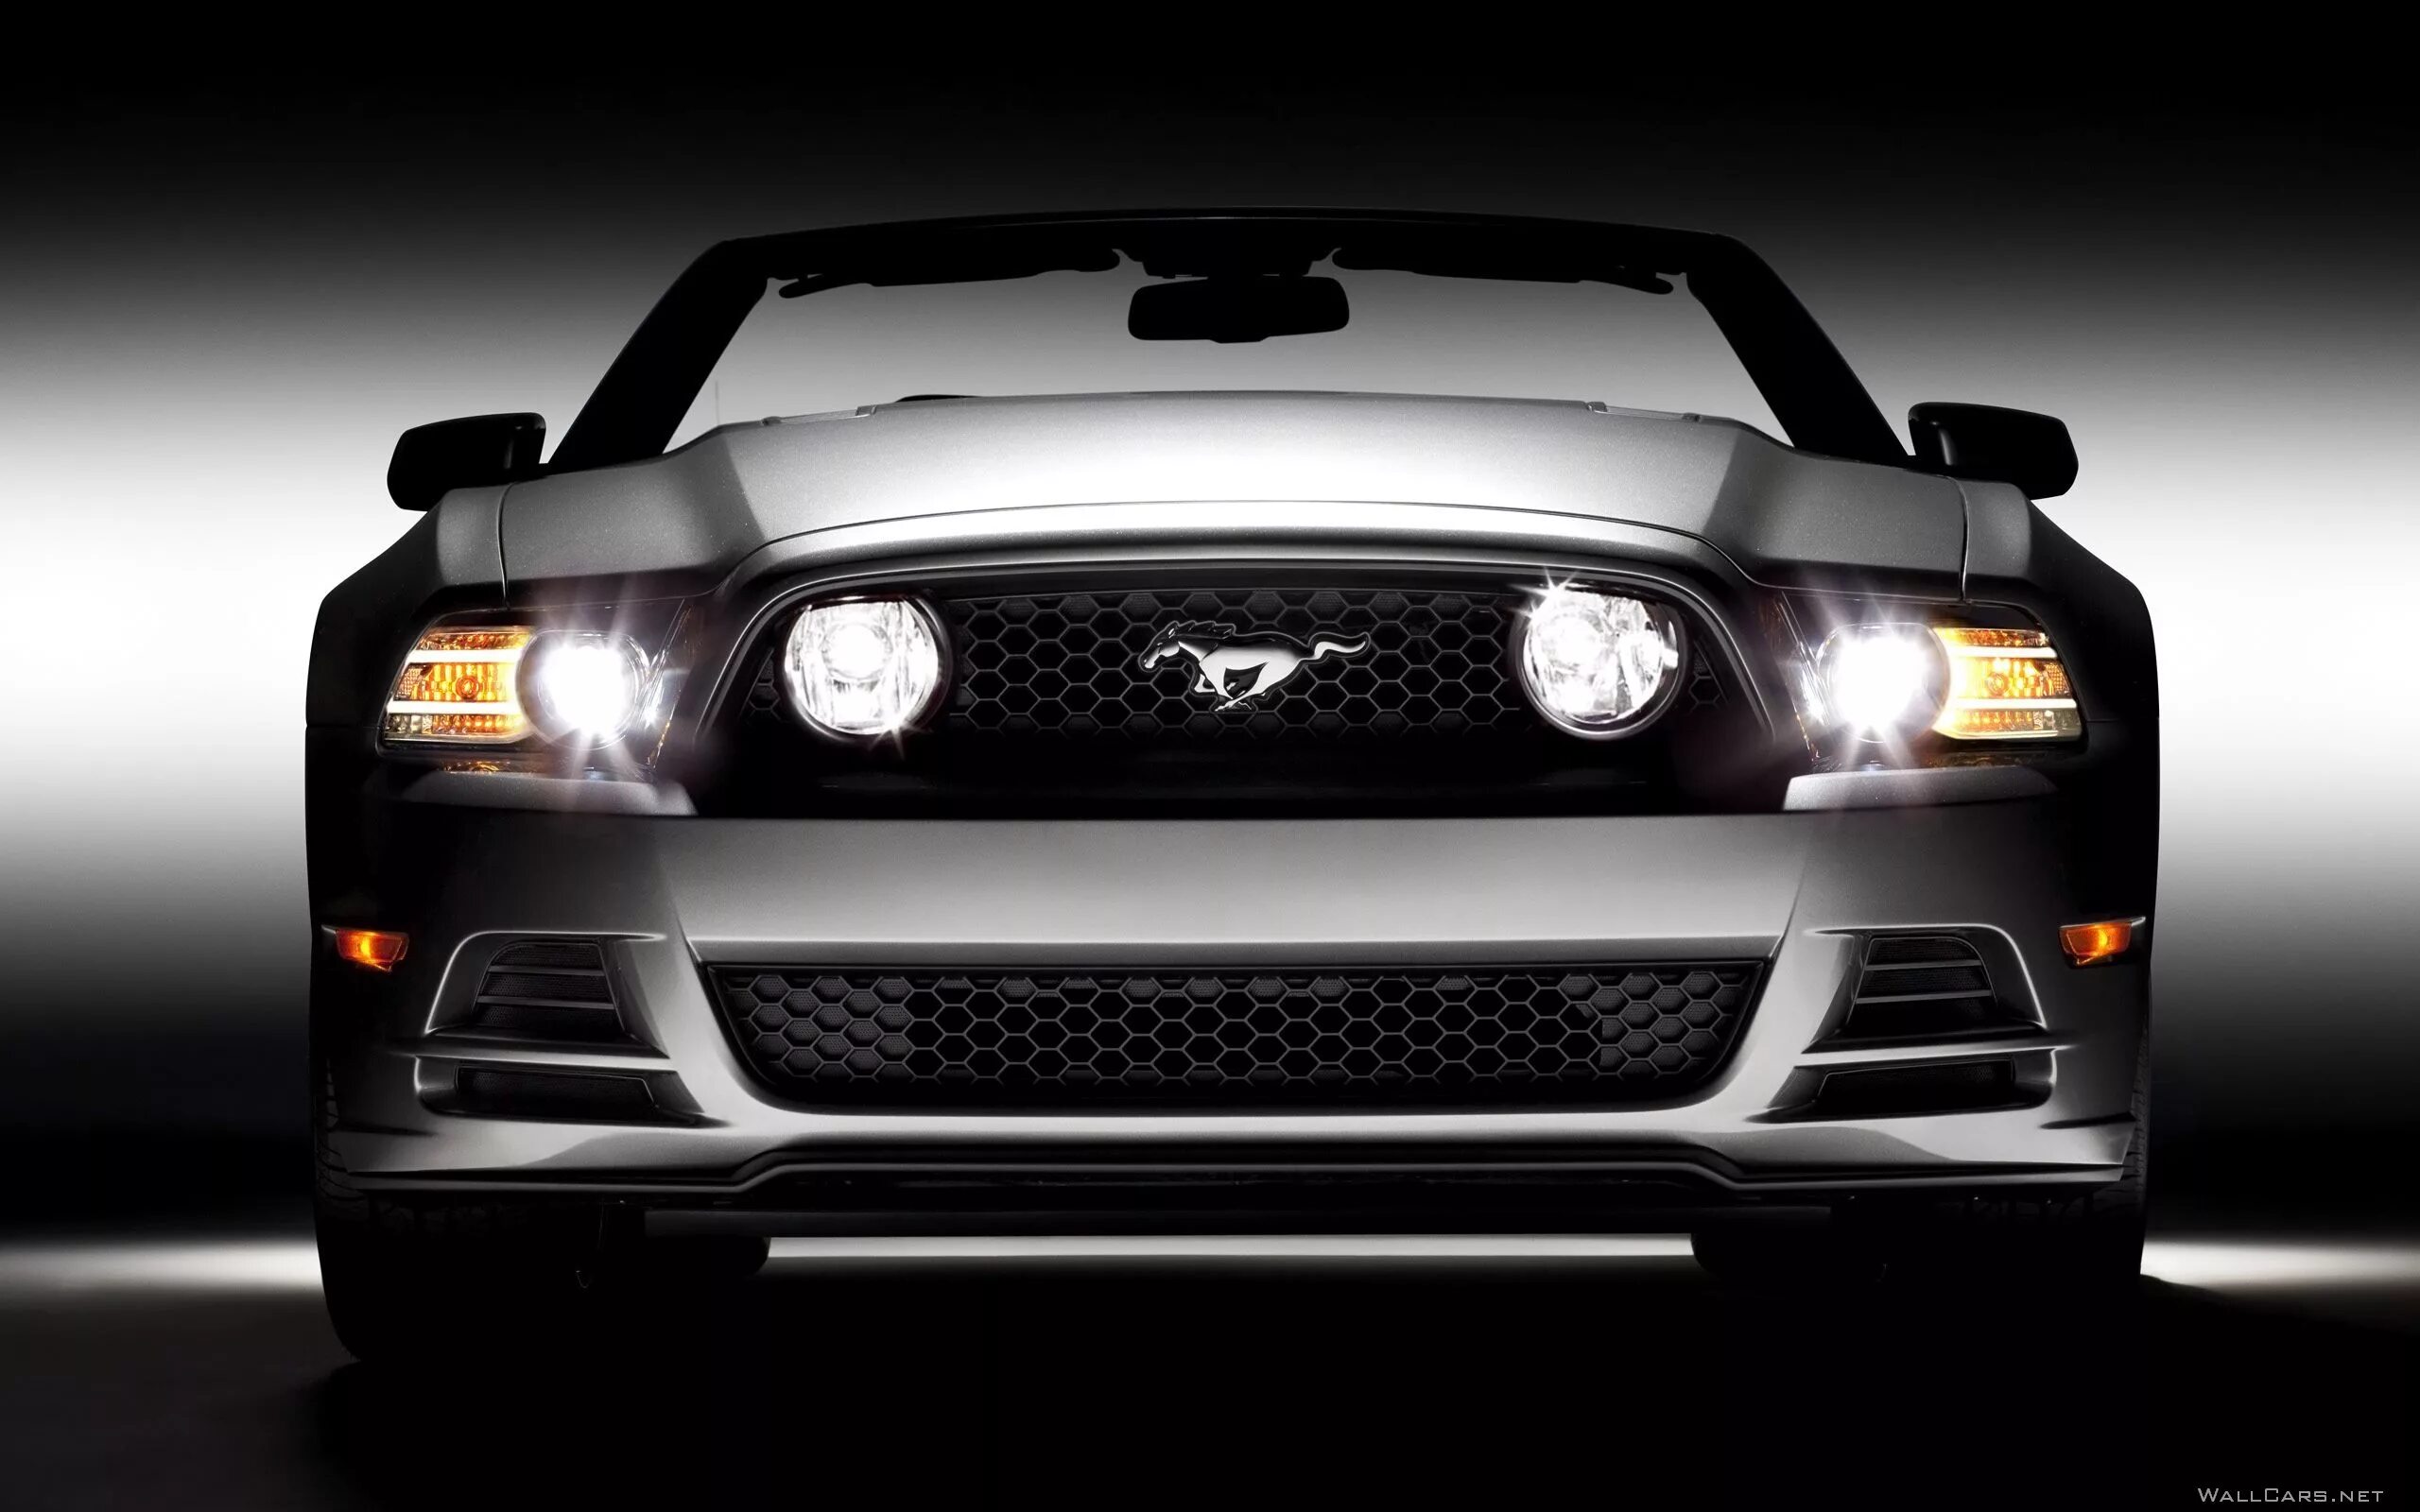 Мустанг фары. Форд Мустанг 5.0. Форд Мустанг 5 поколения Рестайлинг. Ford Mustang 2013. Ford Mustang gt 5.0 s197.